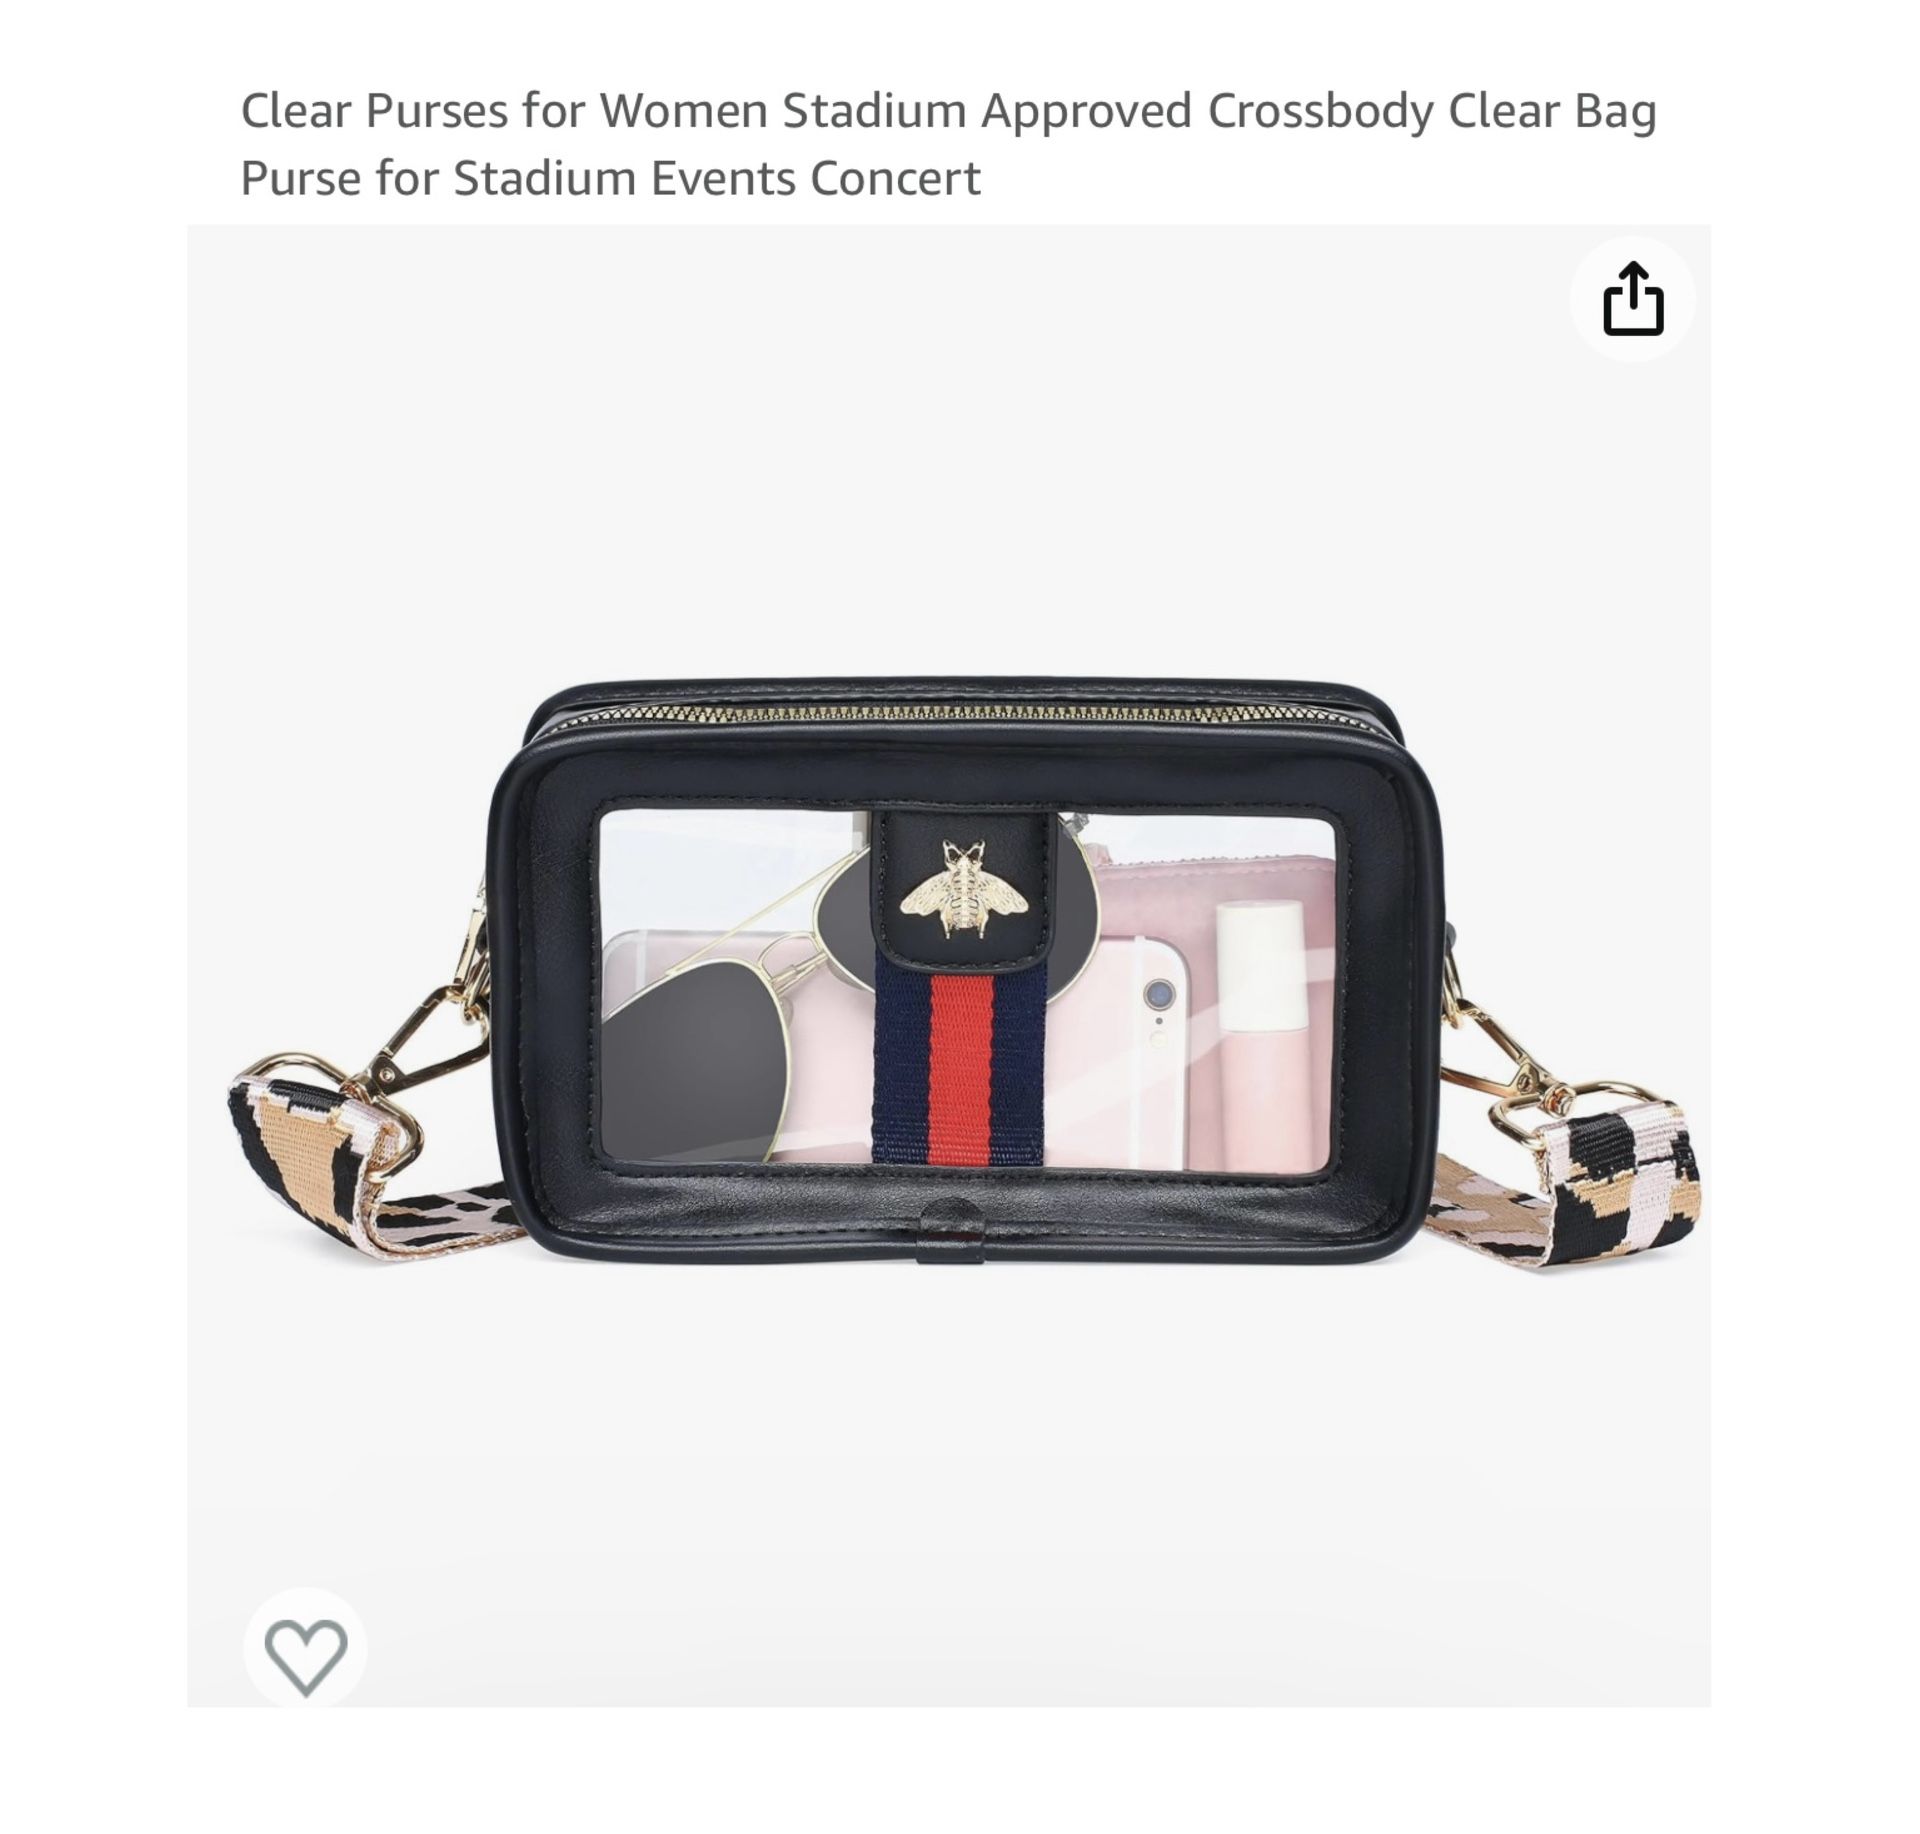 Brand new Clear Purses for Women Stadium Approved Crossbody Clear Bag Purse for Stadium Events Concert  Whitestone/Flushing, Queens or Midtown Manhatt